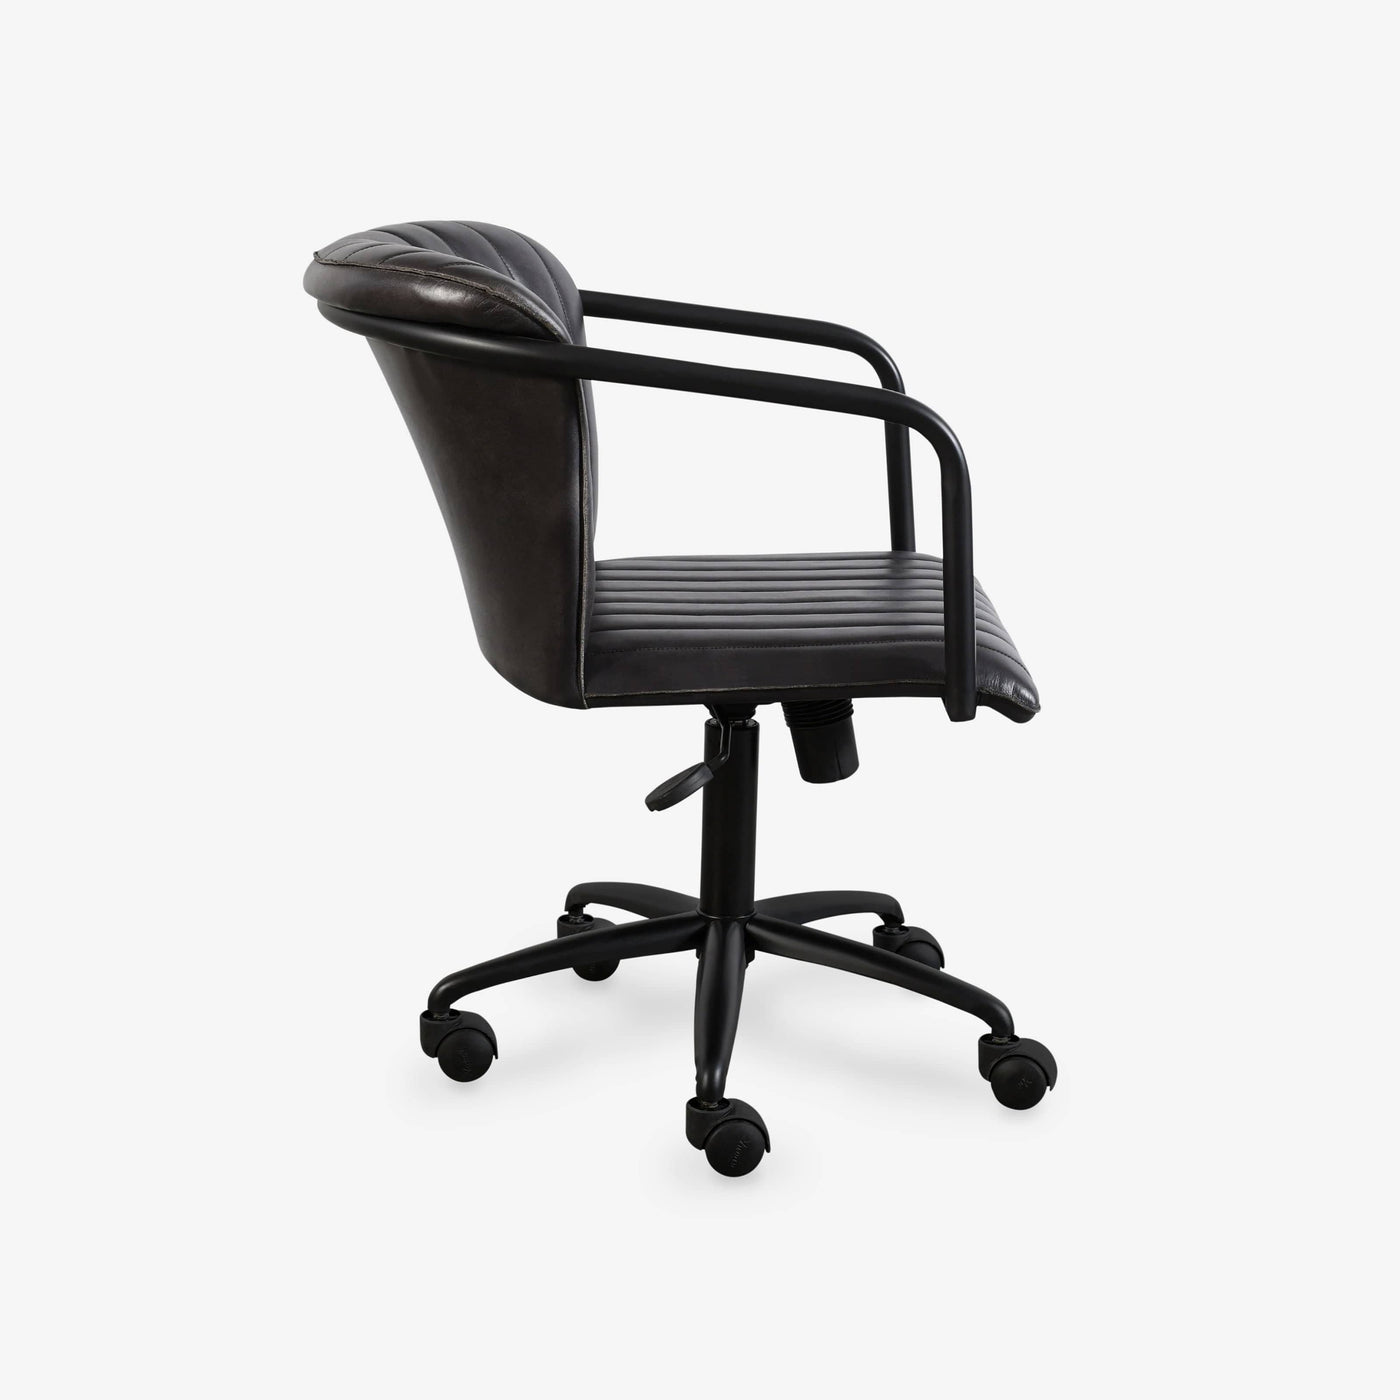 Iron Leather Office Chair, Black, 52x61x84 cm - 3